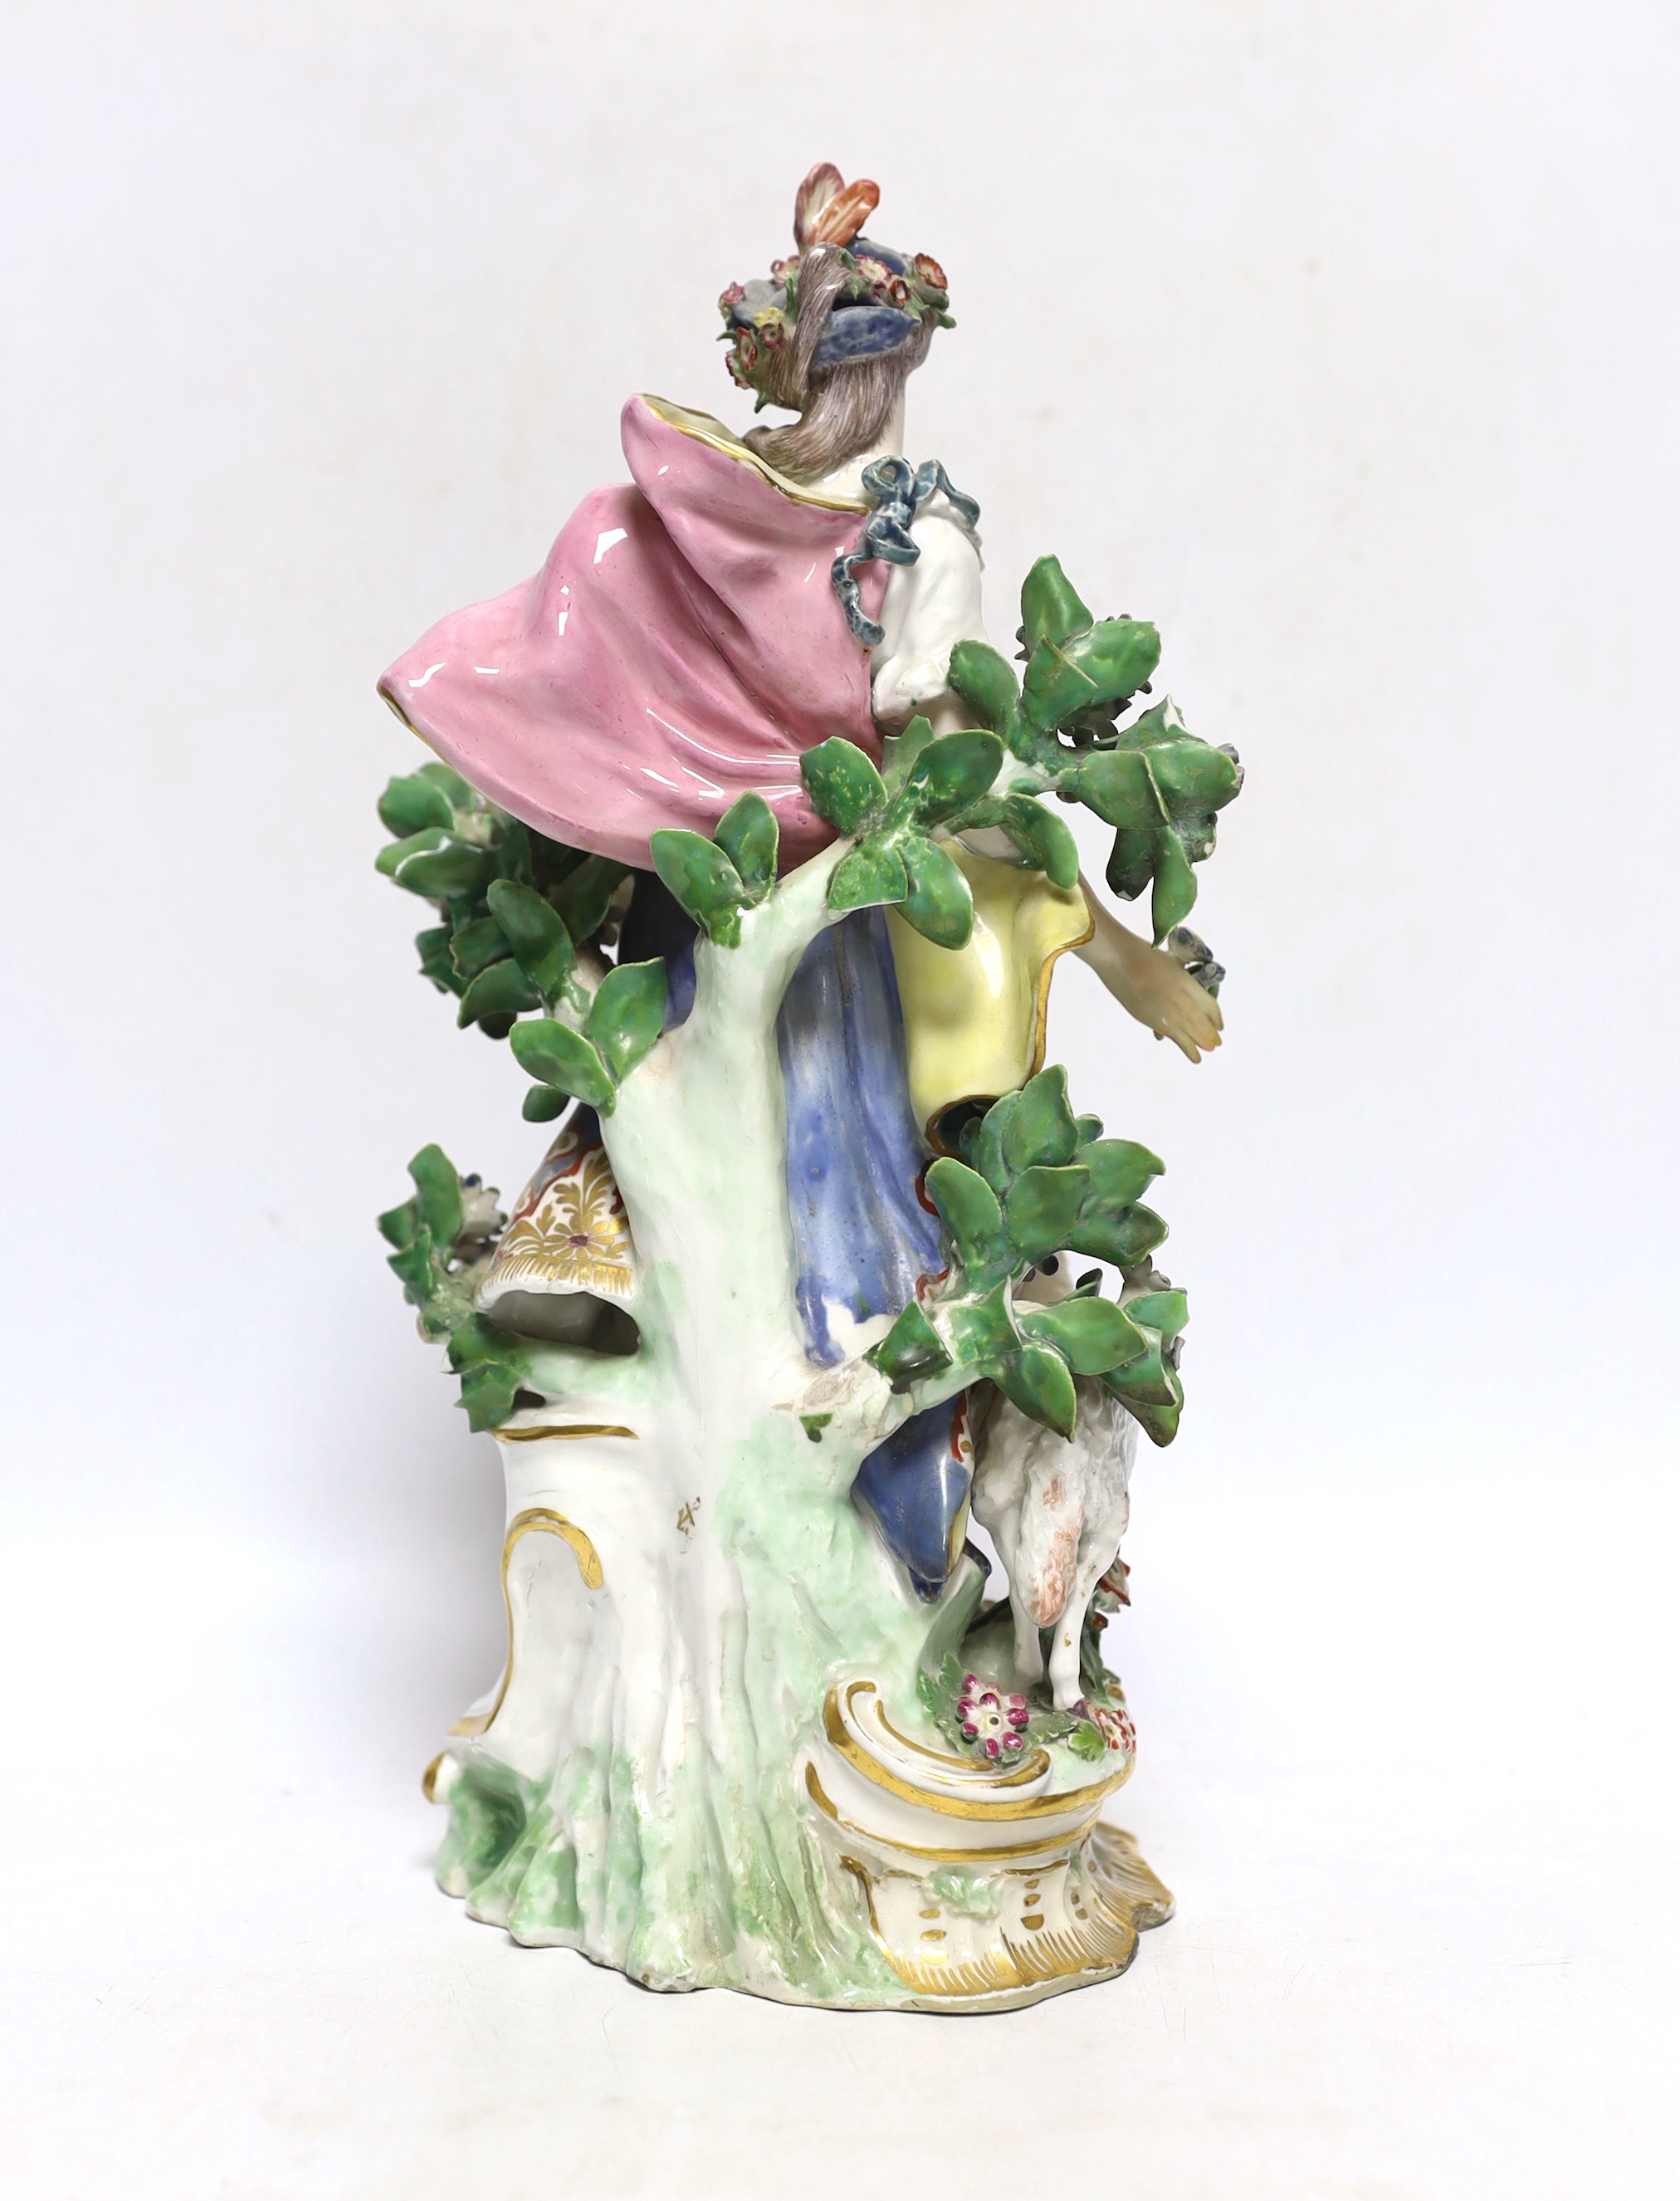 An 18th century Chelsea /Derby figure, of a girl holding a lamb, gold anchor mark, 30cm high